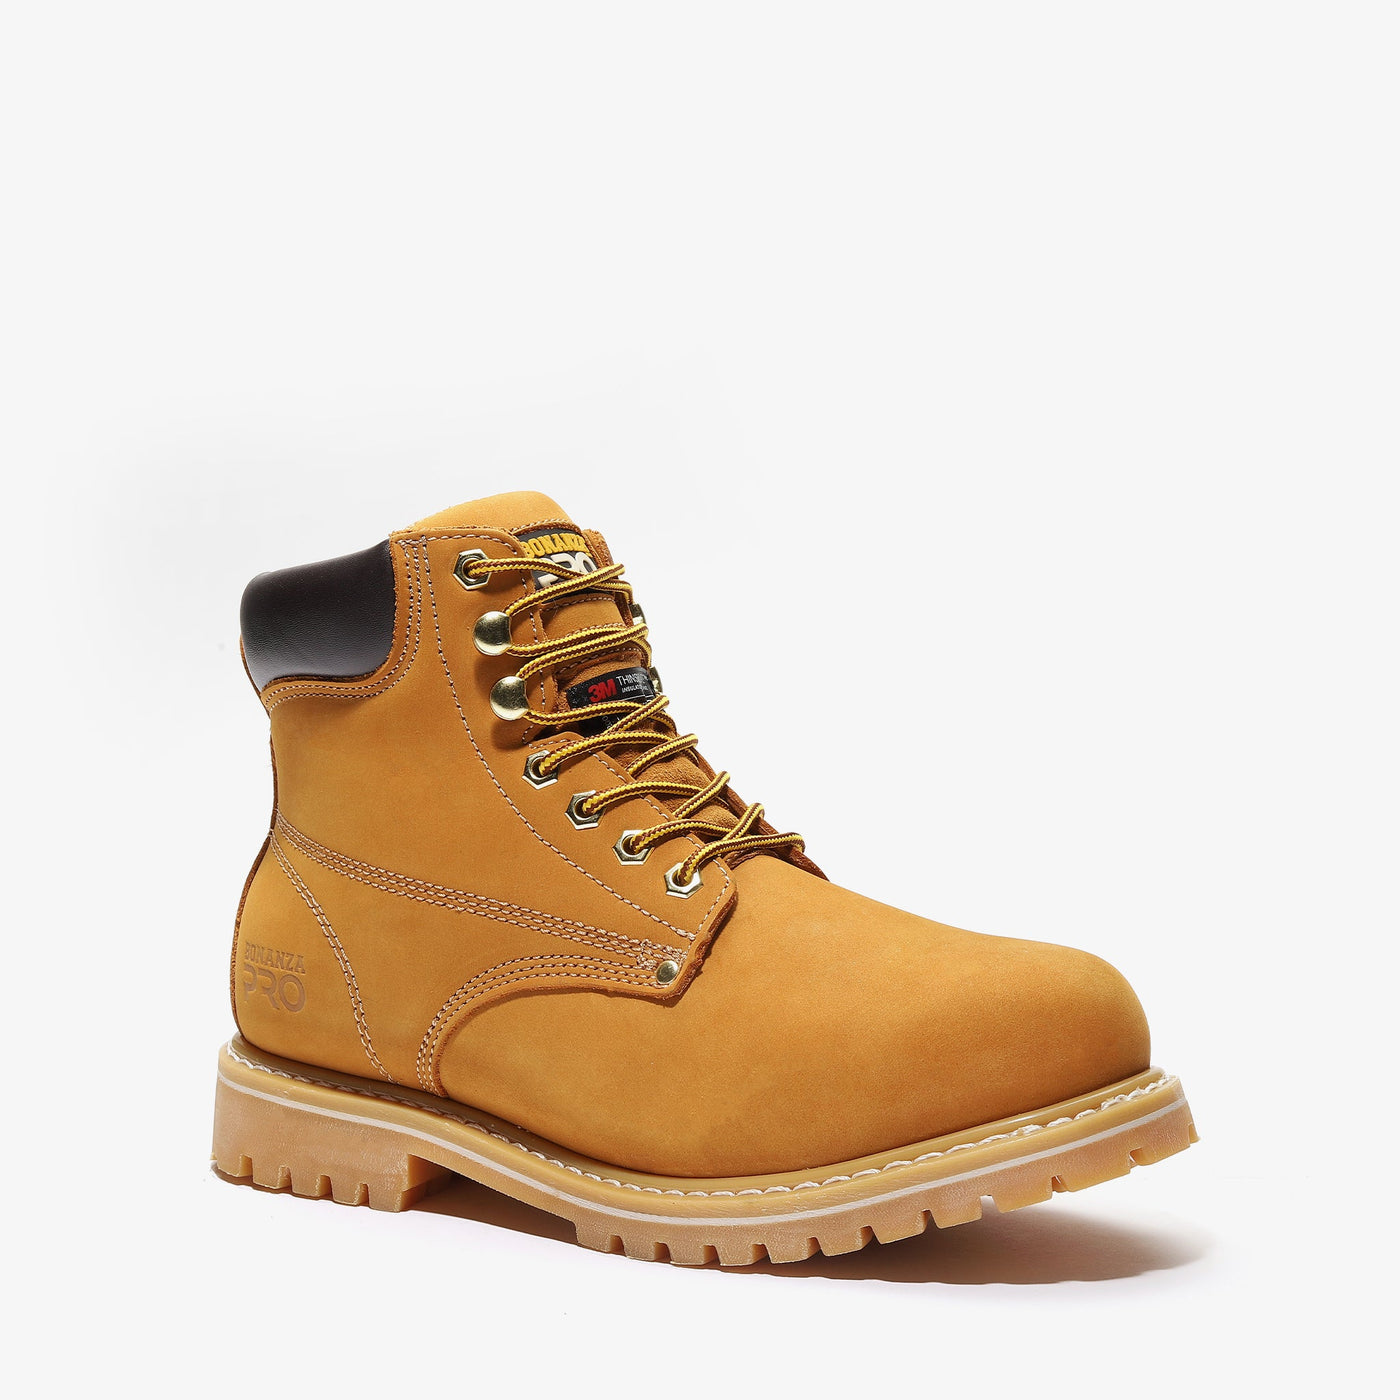 FORESTER 6" LUG SOLE WORK BOOT